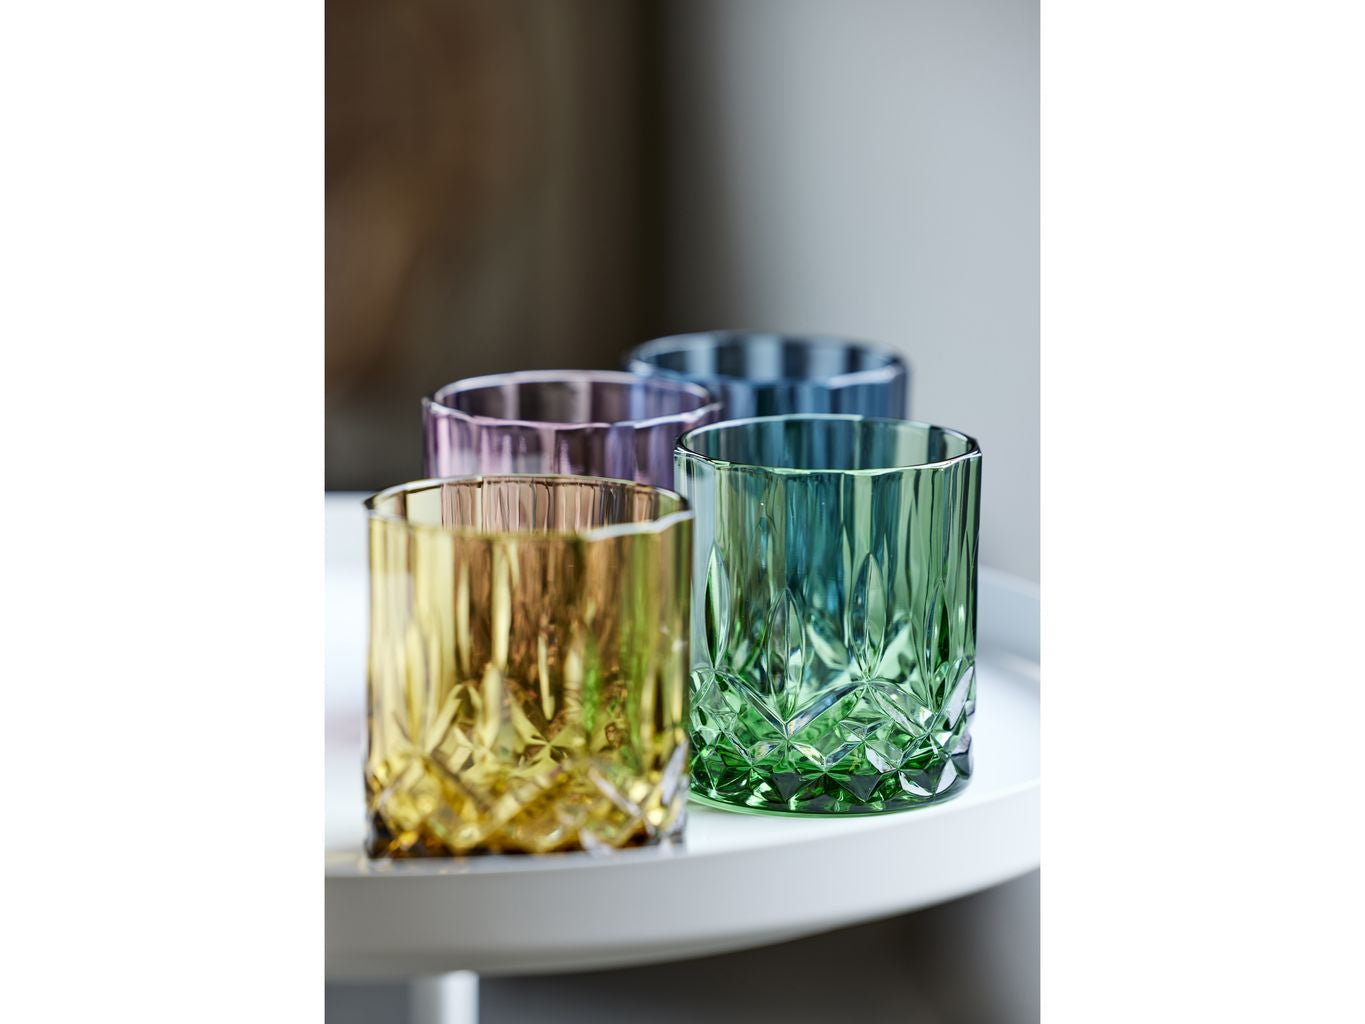 Lyngby Glas Sorrento Whisky Glass 32 CL, 4 PC. Culo.